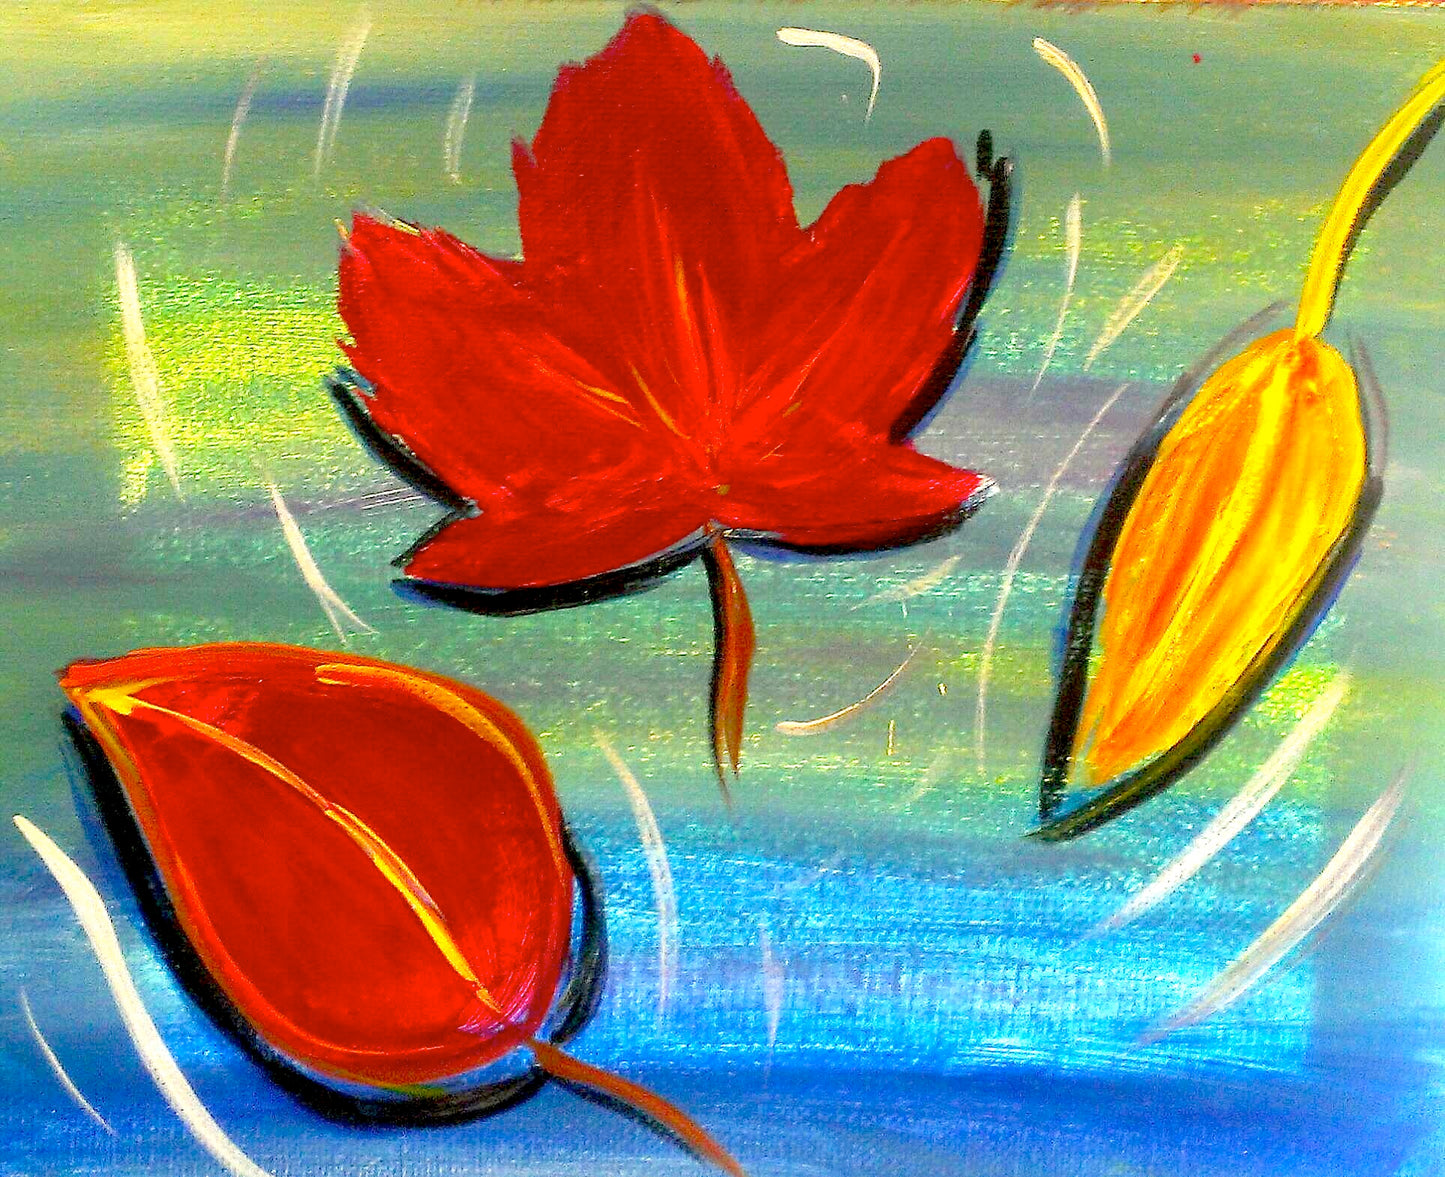 Leaves on Water Paint Kit (8x10 or 11x14)